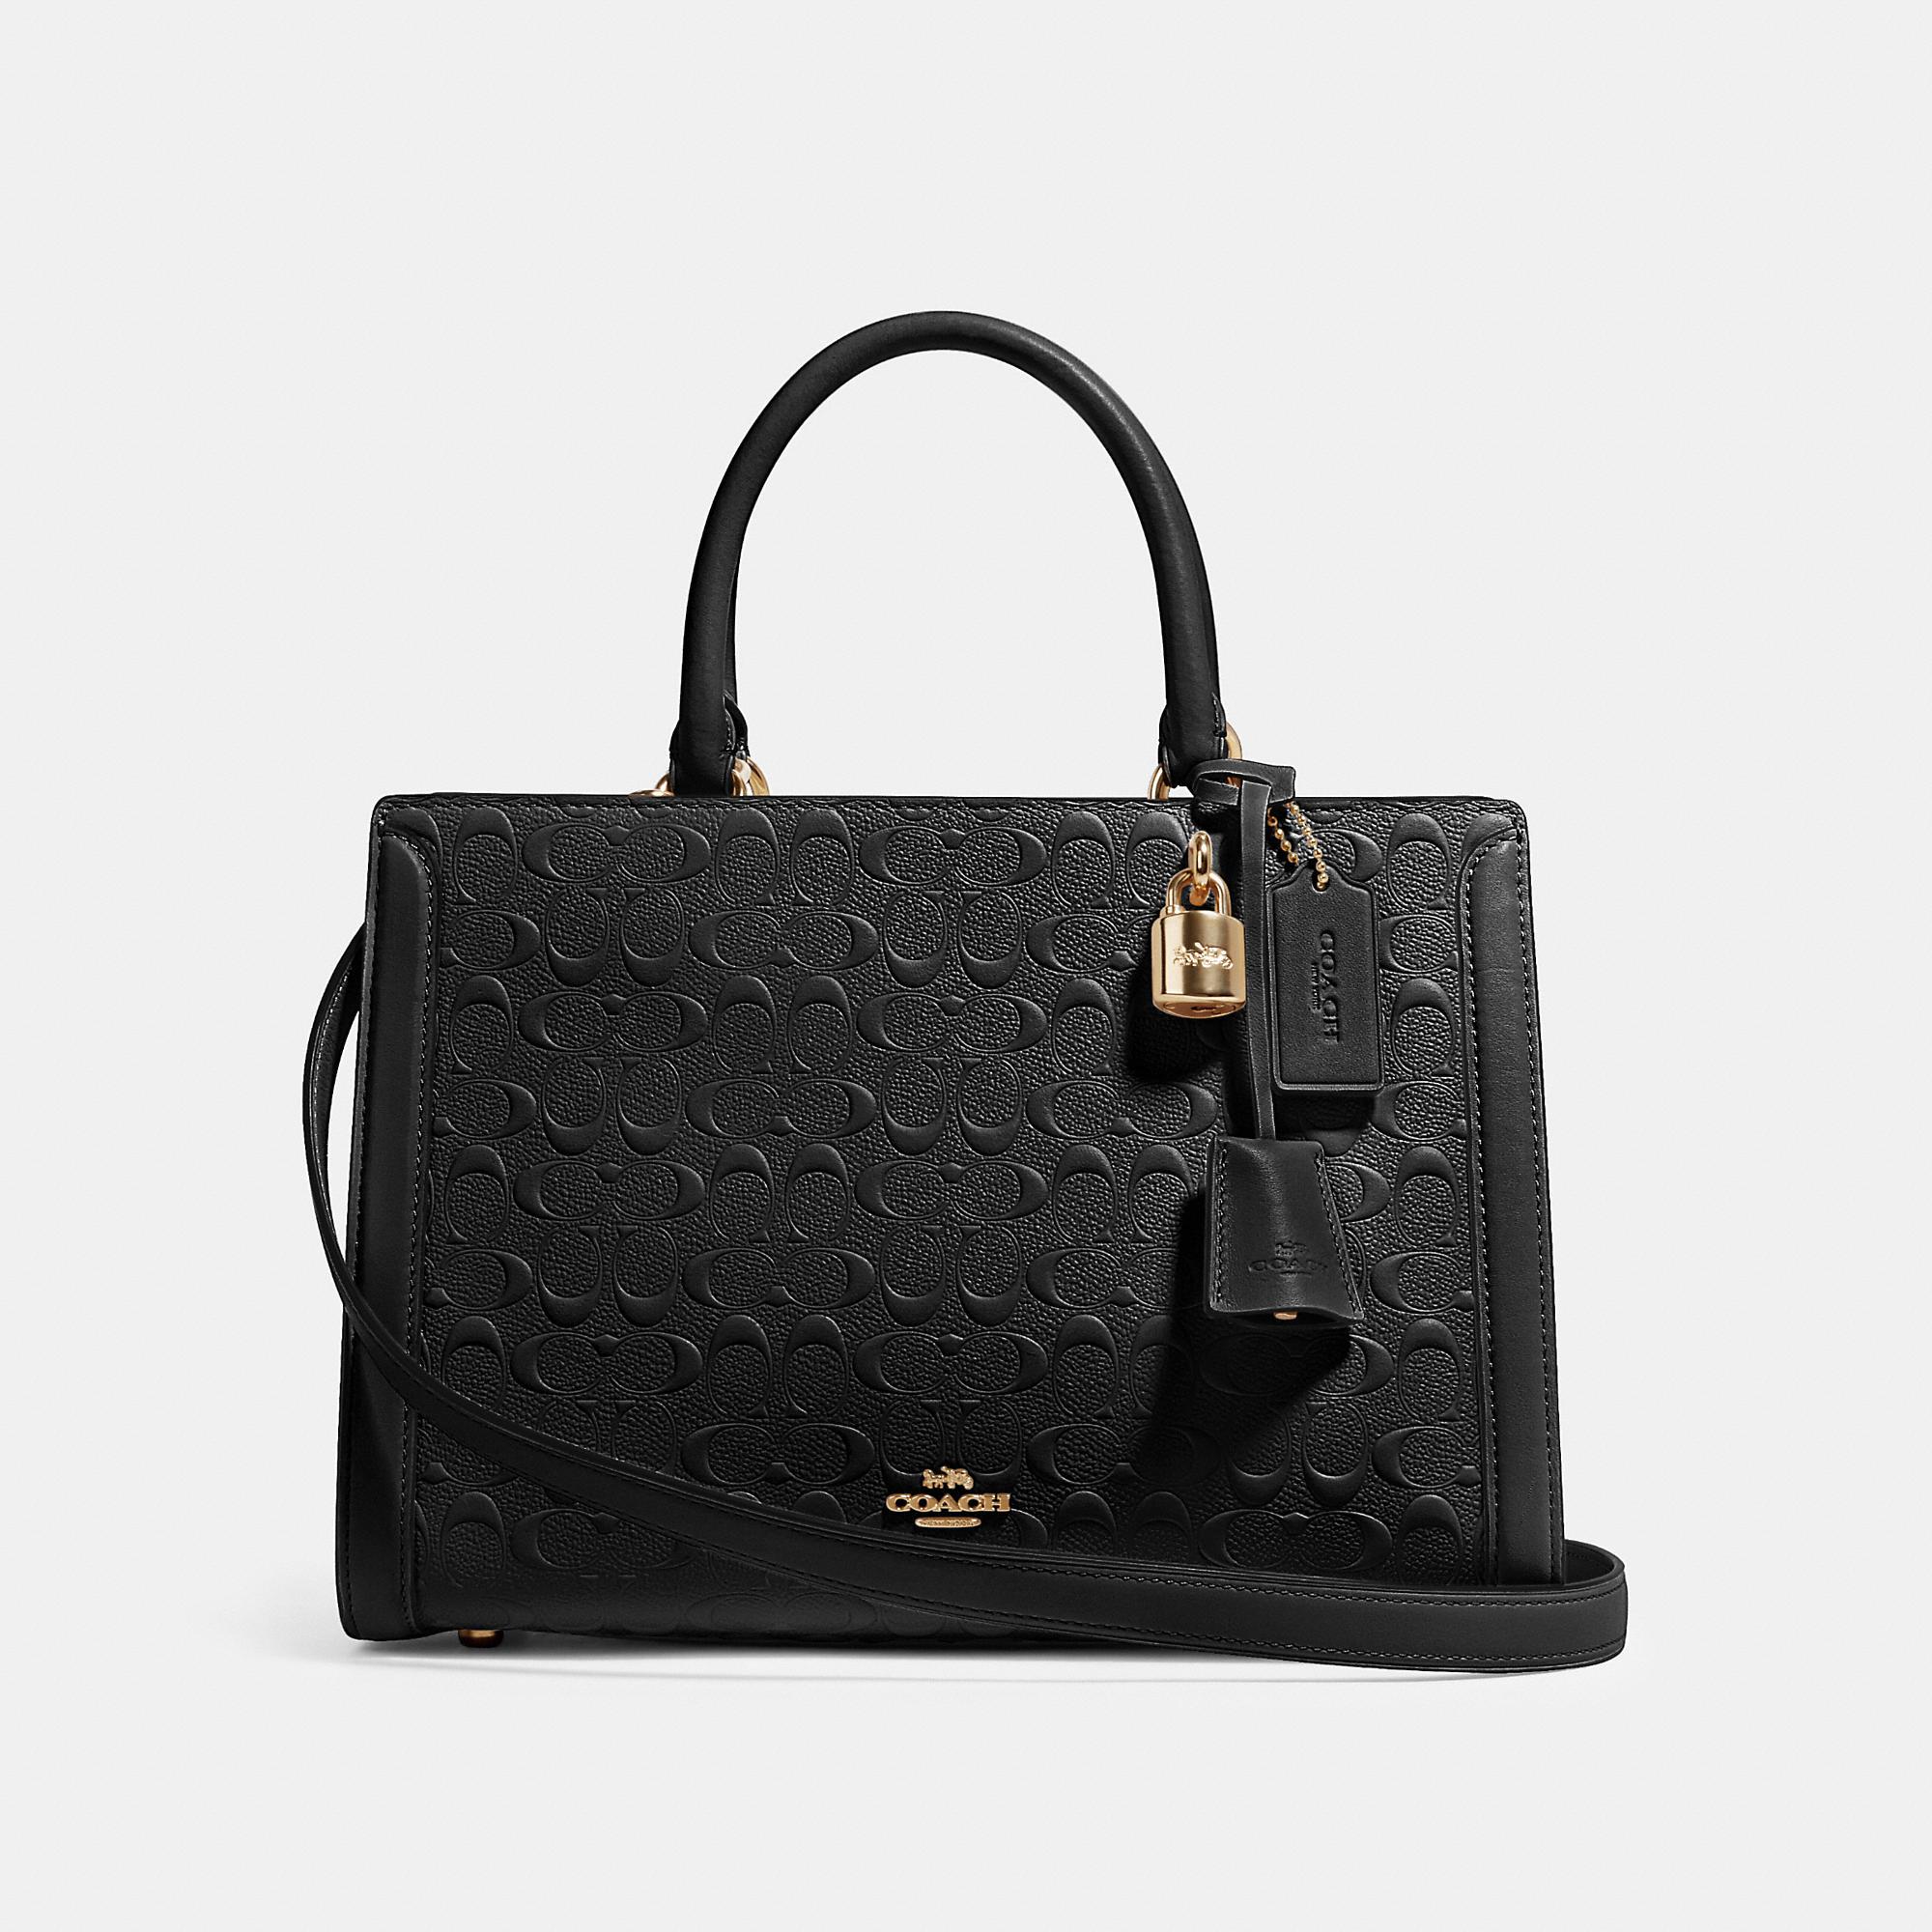 COACH Zoe Carryall In Signature Leather in Black